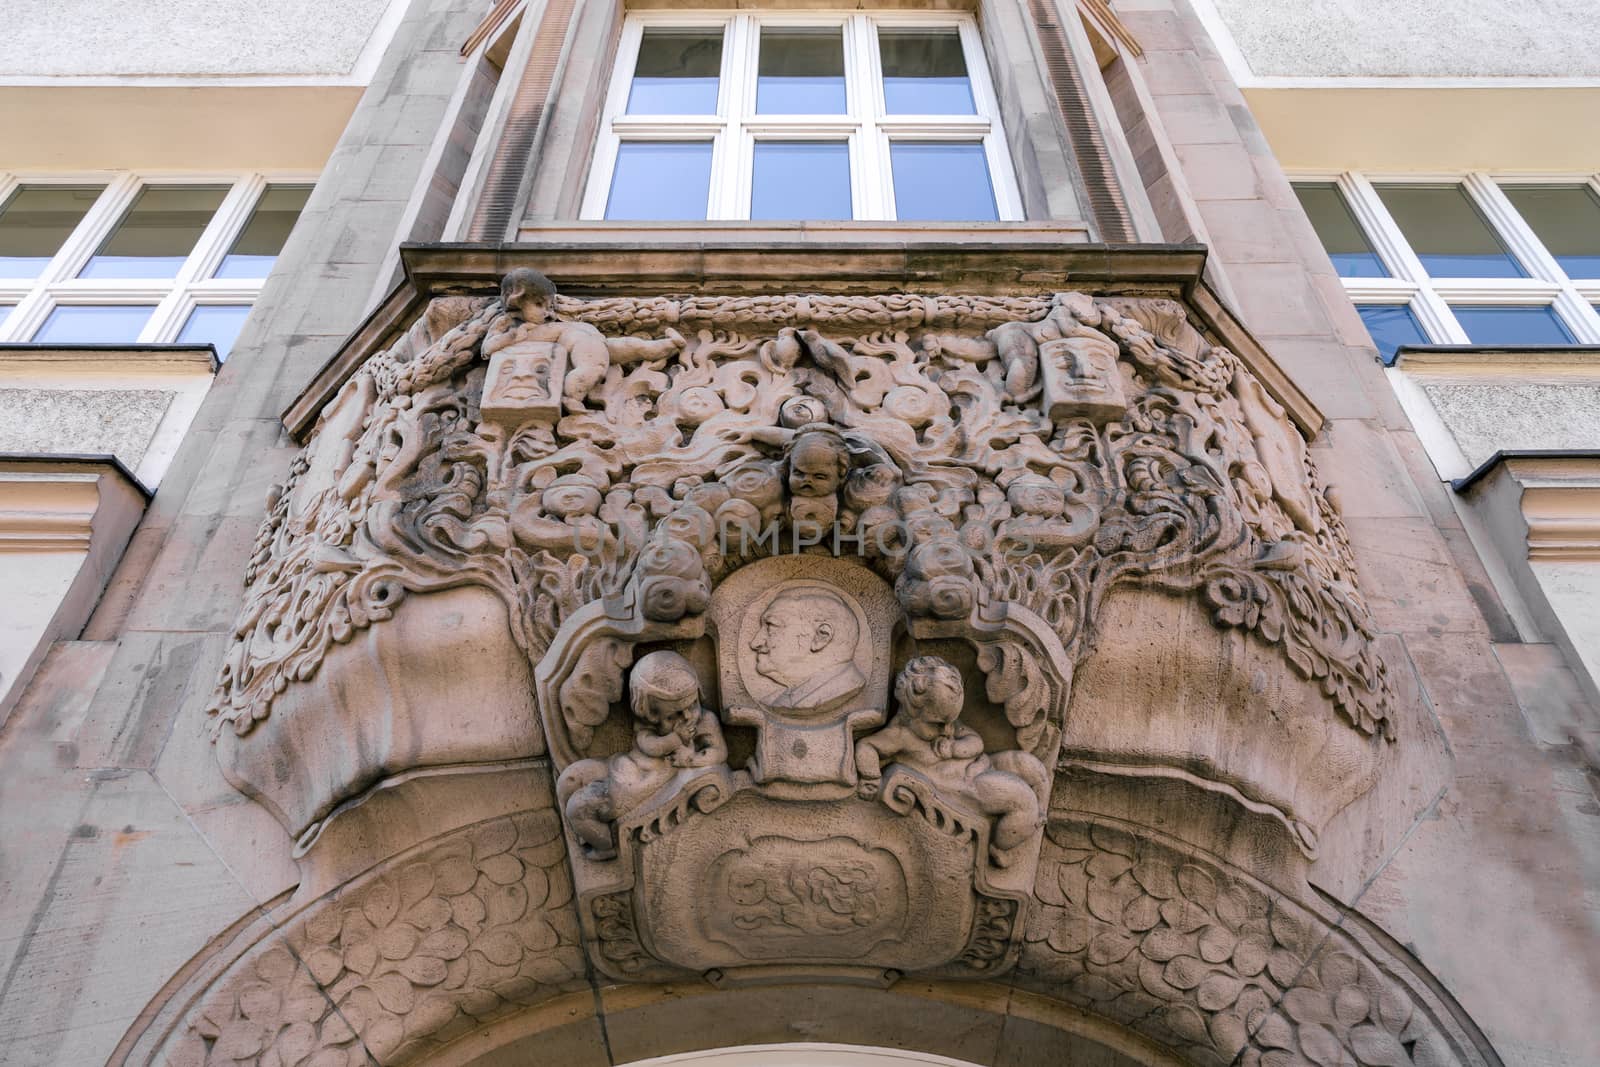 Architectural details. Sculptural decoration of the gable and arched entrance in the Baroque style. by Anelik